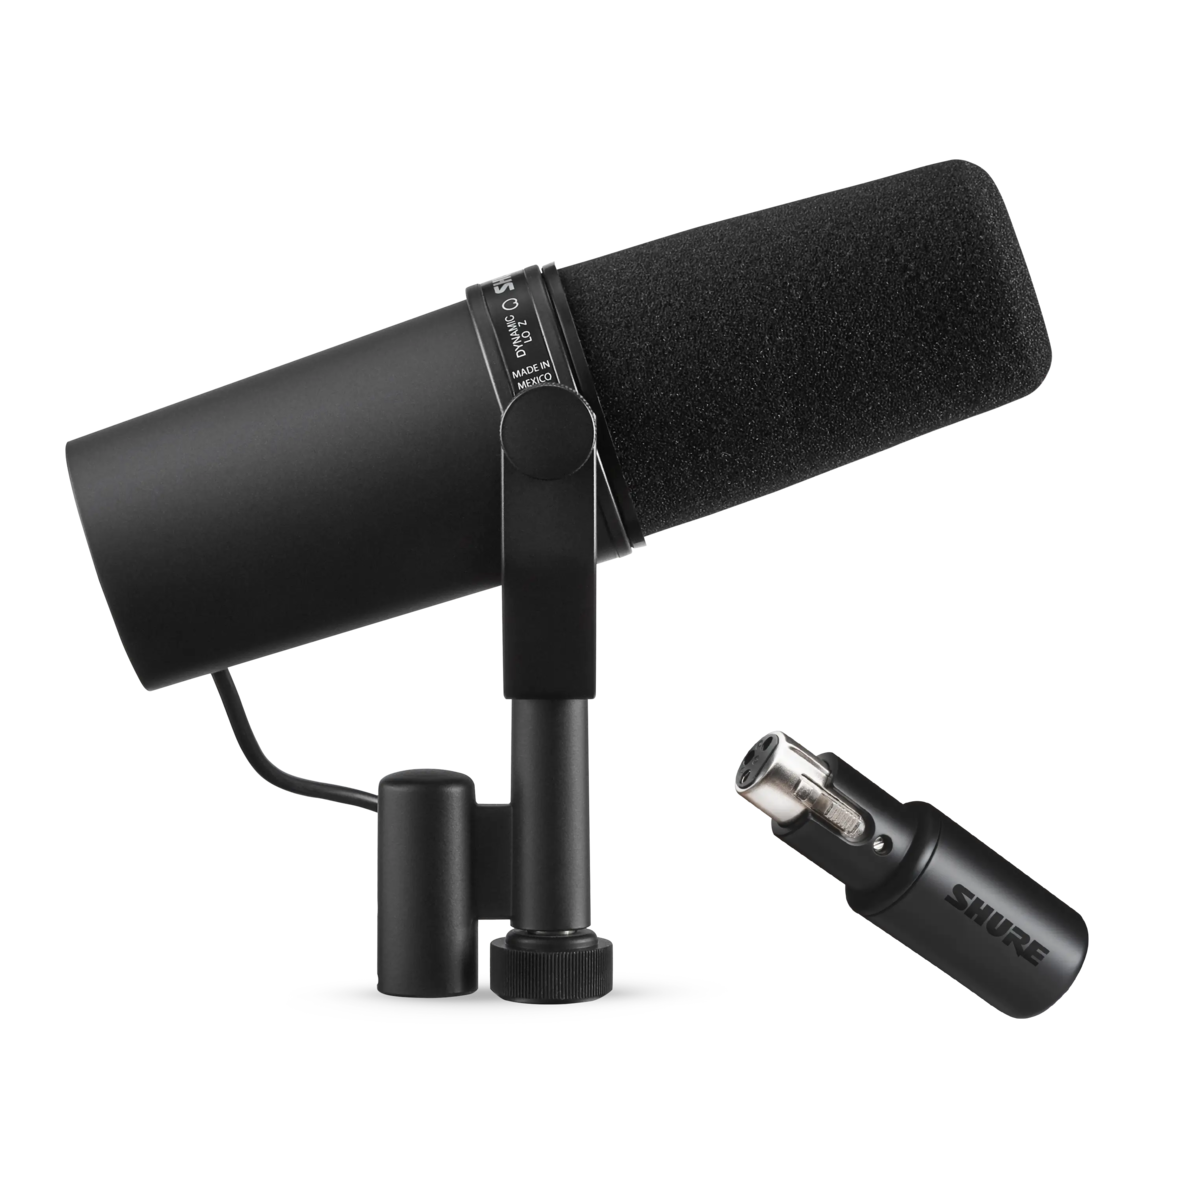 https://products.shureweb.eu/cdn-cgi/image/width=1400,height=1400,format=auto/shure_product_db/product_main_images/files/f83/79b/58-/header_transparent/9b515b5fabe3cd8fbbc65cae74743111.png